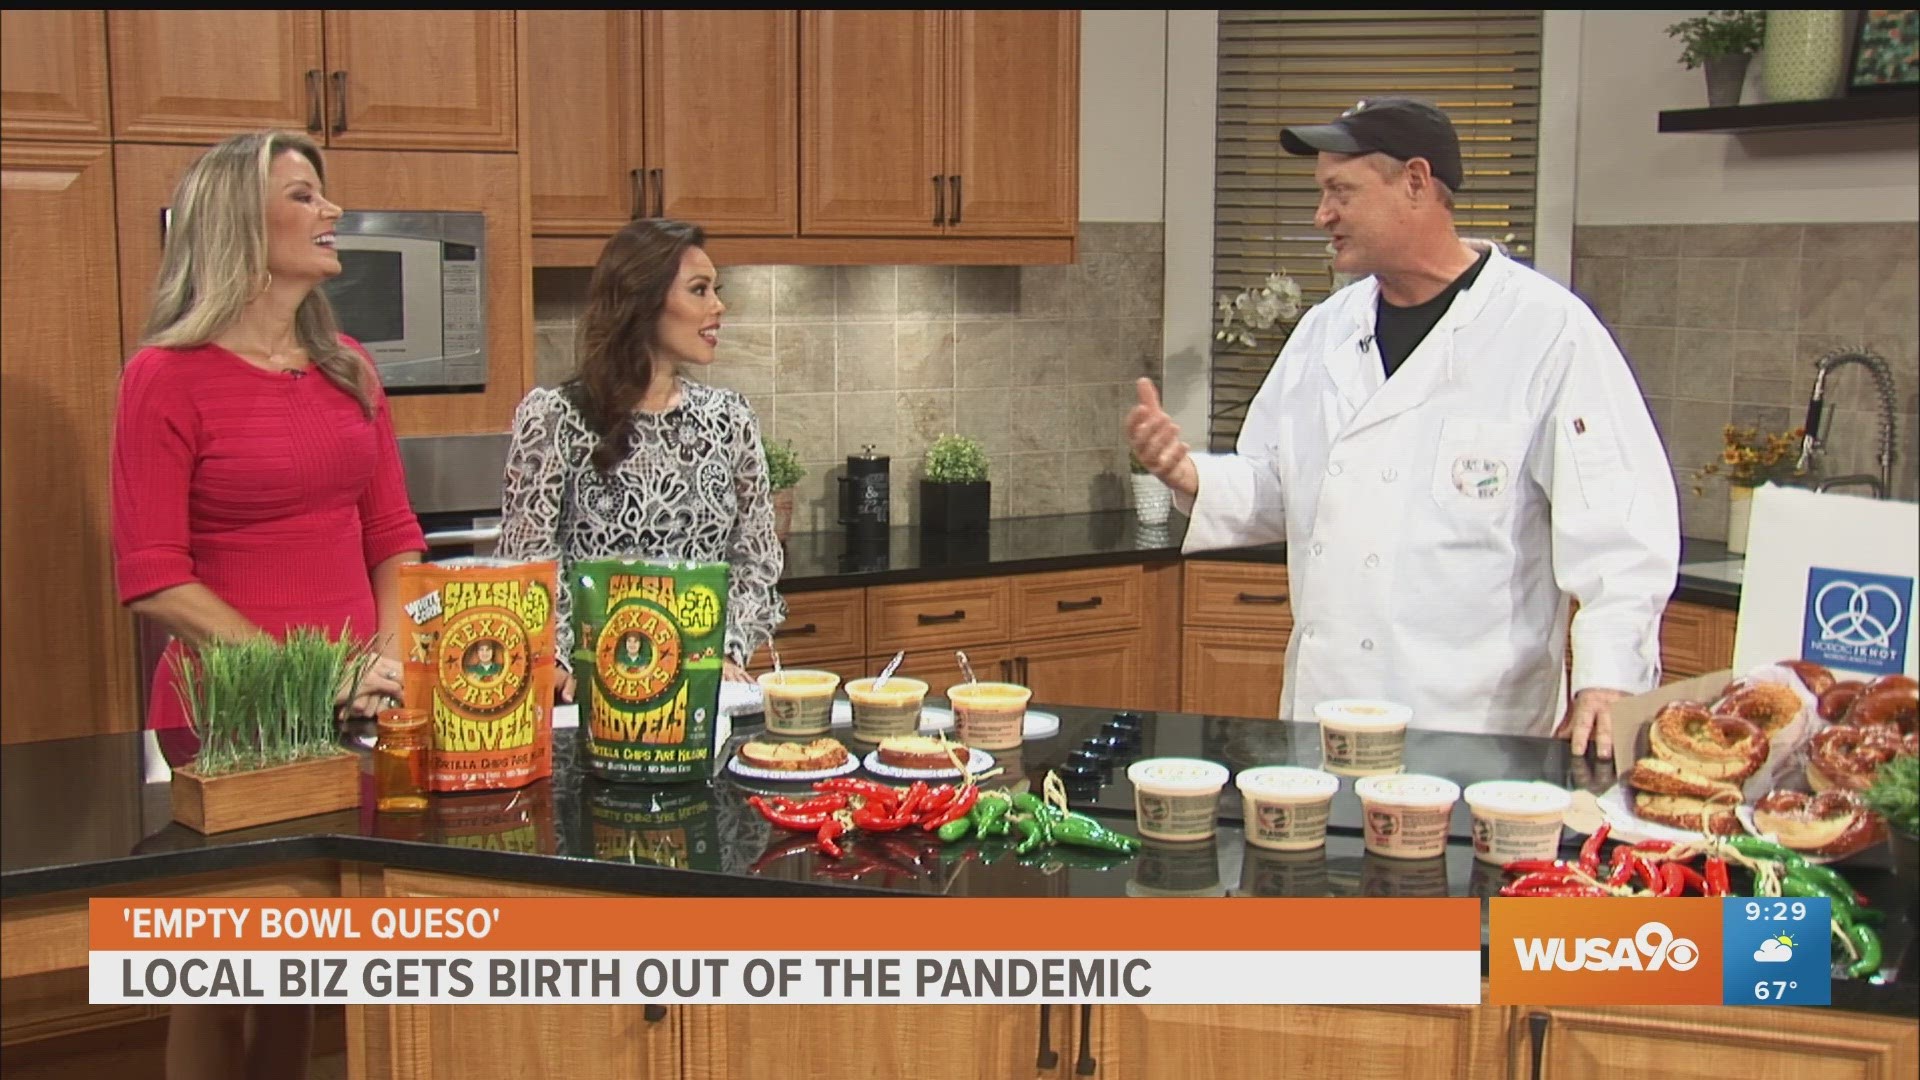 Jeff Fugate made homemade queso for his family and as gifts for friends. He founded Empty Bowl Queso during the pandemic and shares with the Great Day team!